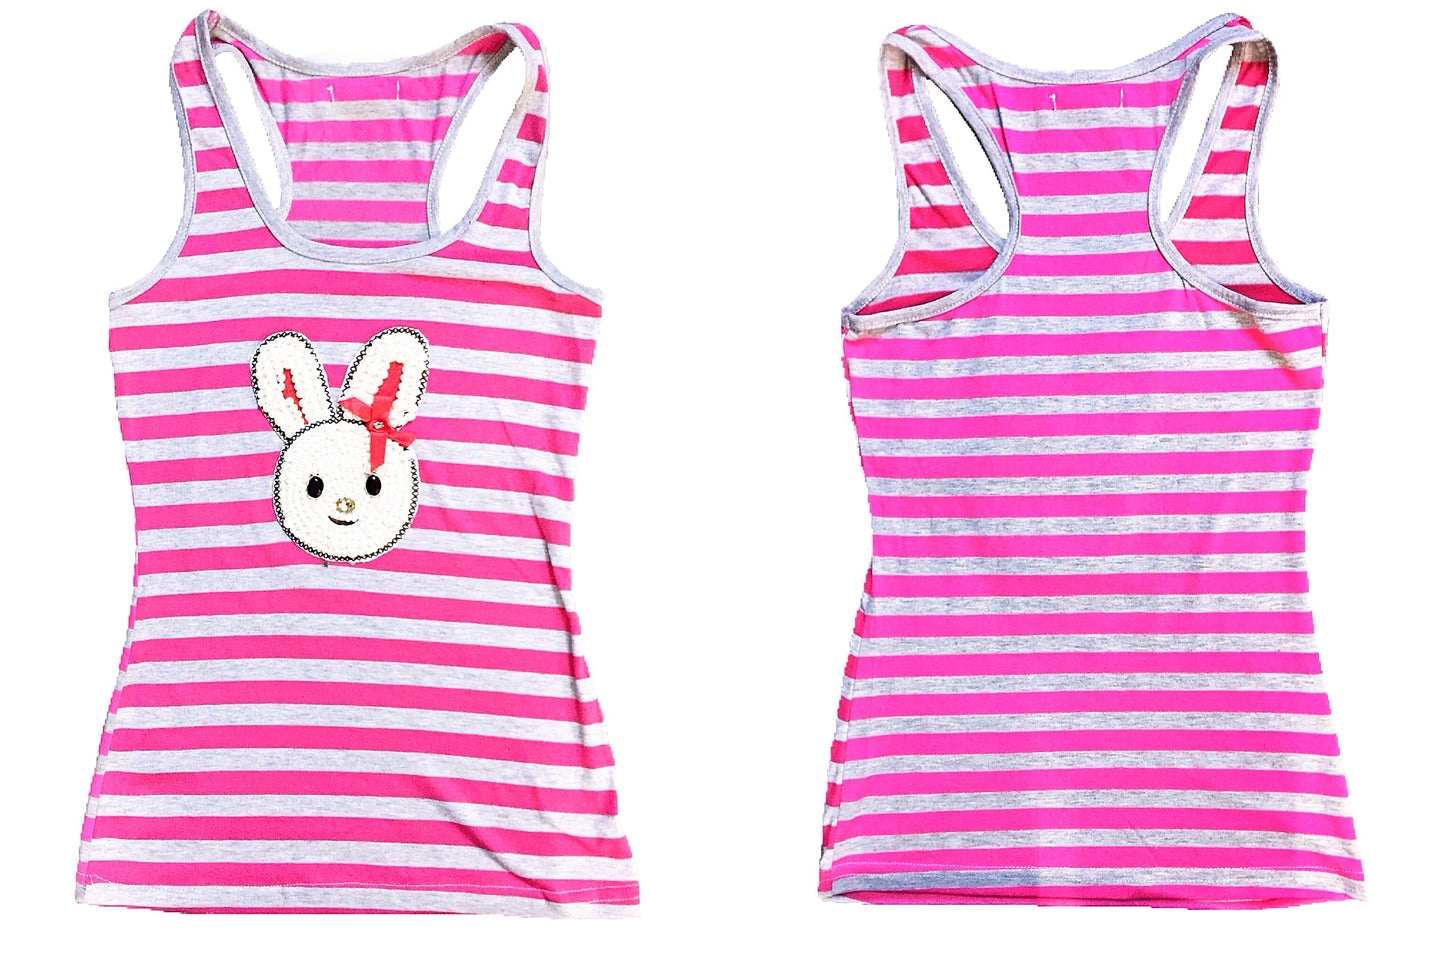 Striped Tank Tops & Shirts with Pearl Rhinestones